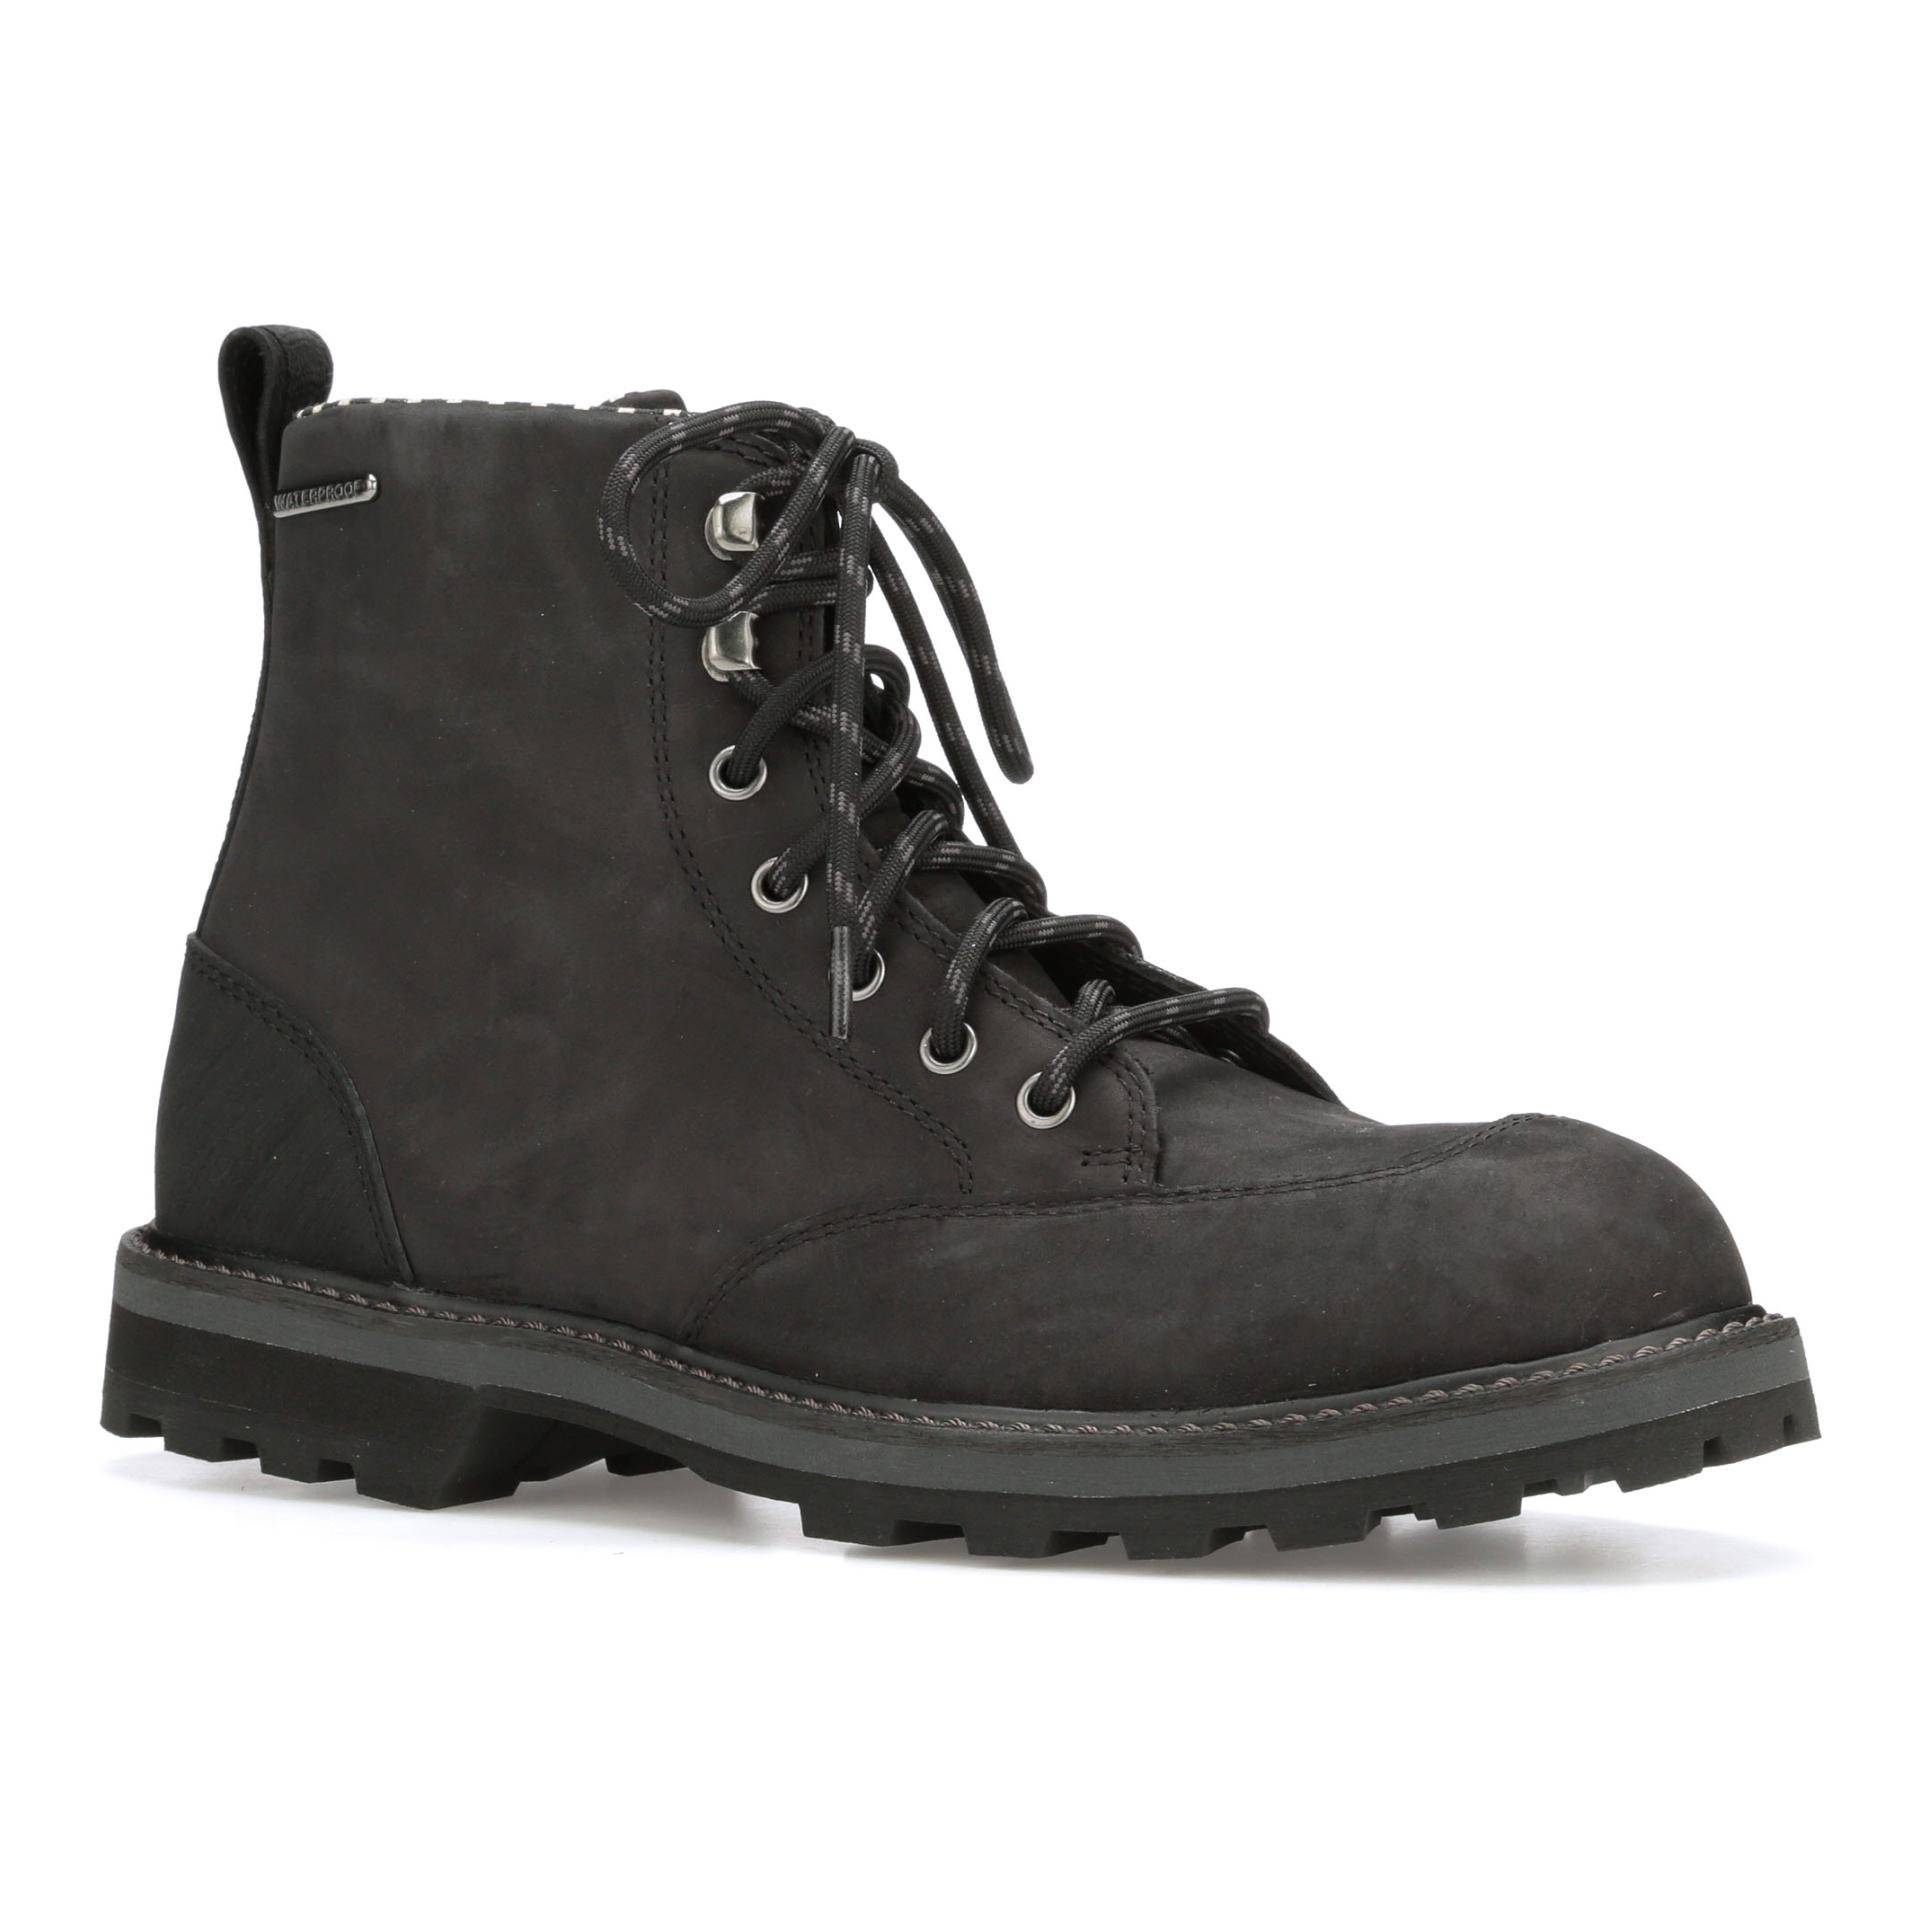 The Original Muck Boot Company Stiefel Foreman Schwarz    42   Grösse: 42 von The Original Muck Boot Company